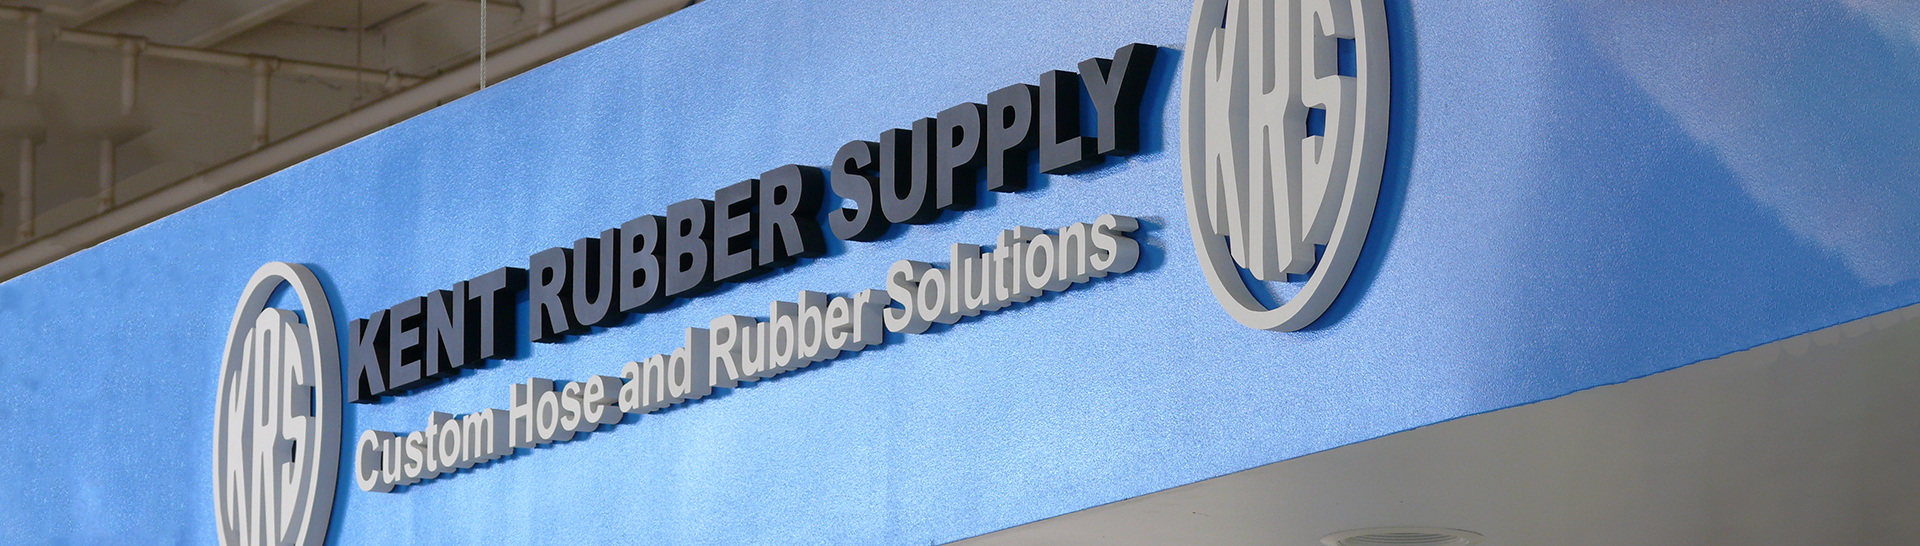 This is an image of the Kent Rubbery Supply sign